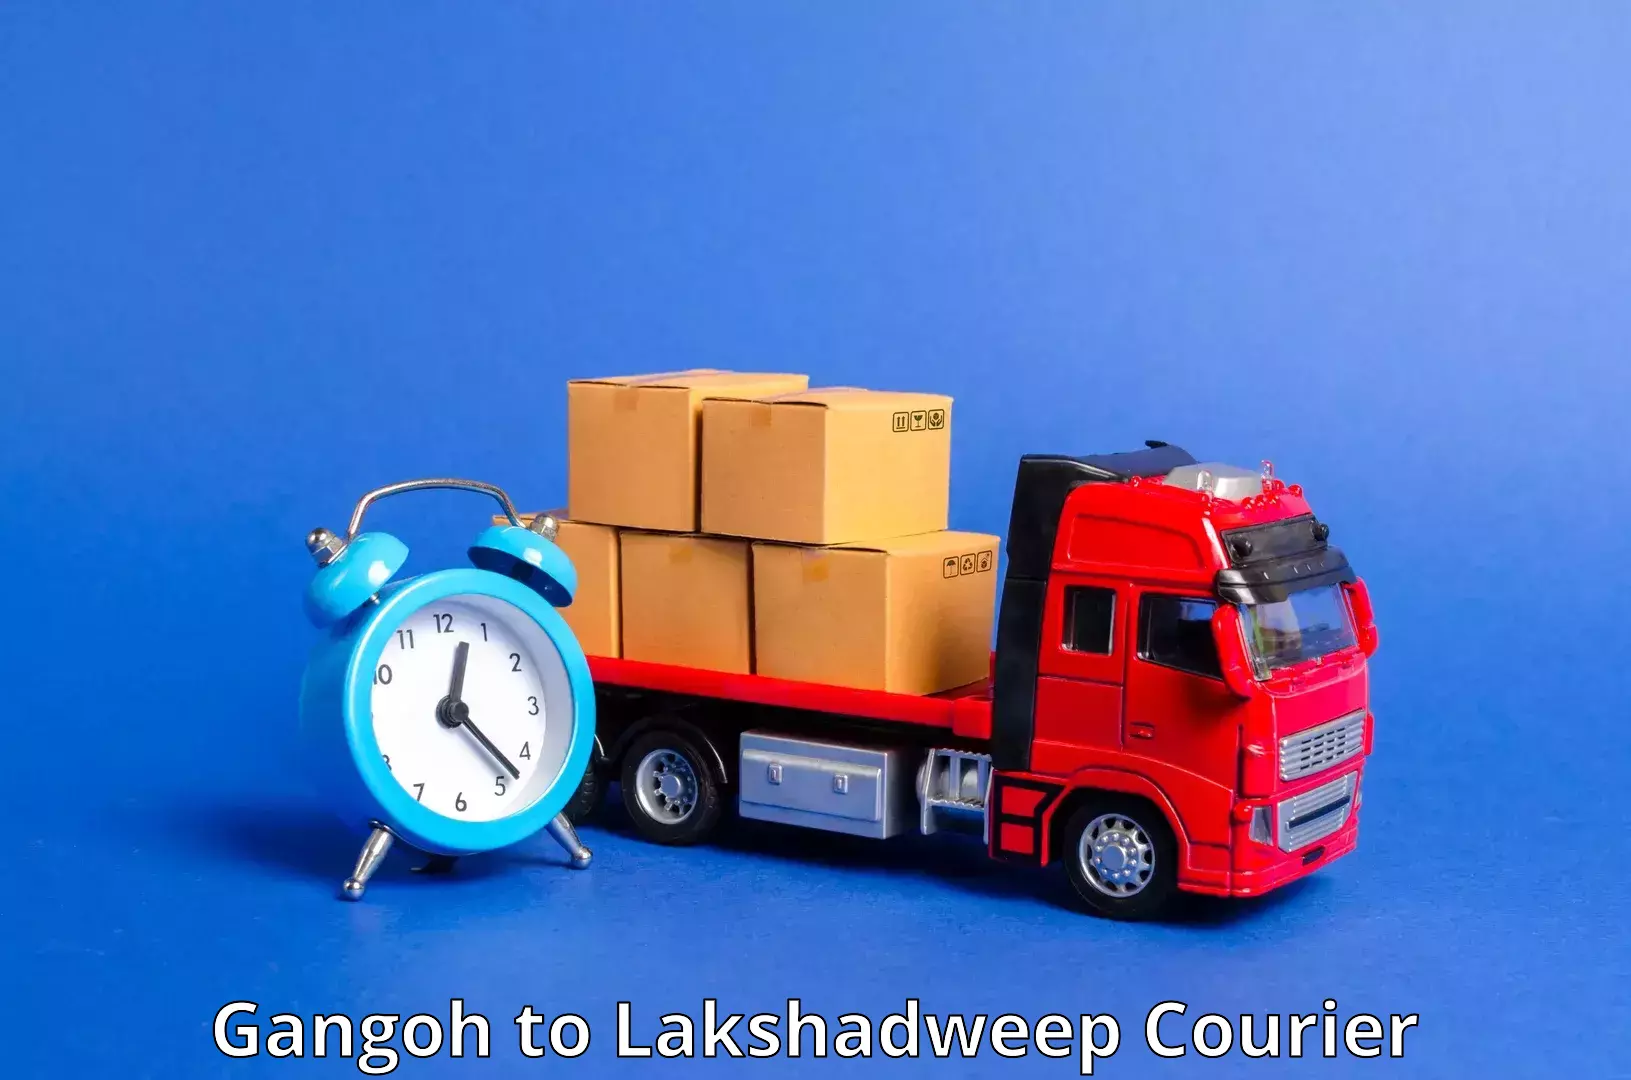 Modern courier technology Gangoh to Lakshadweep